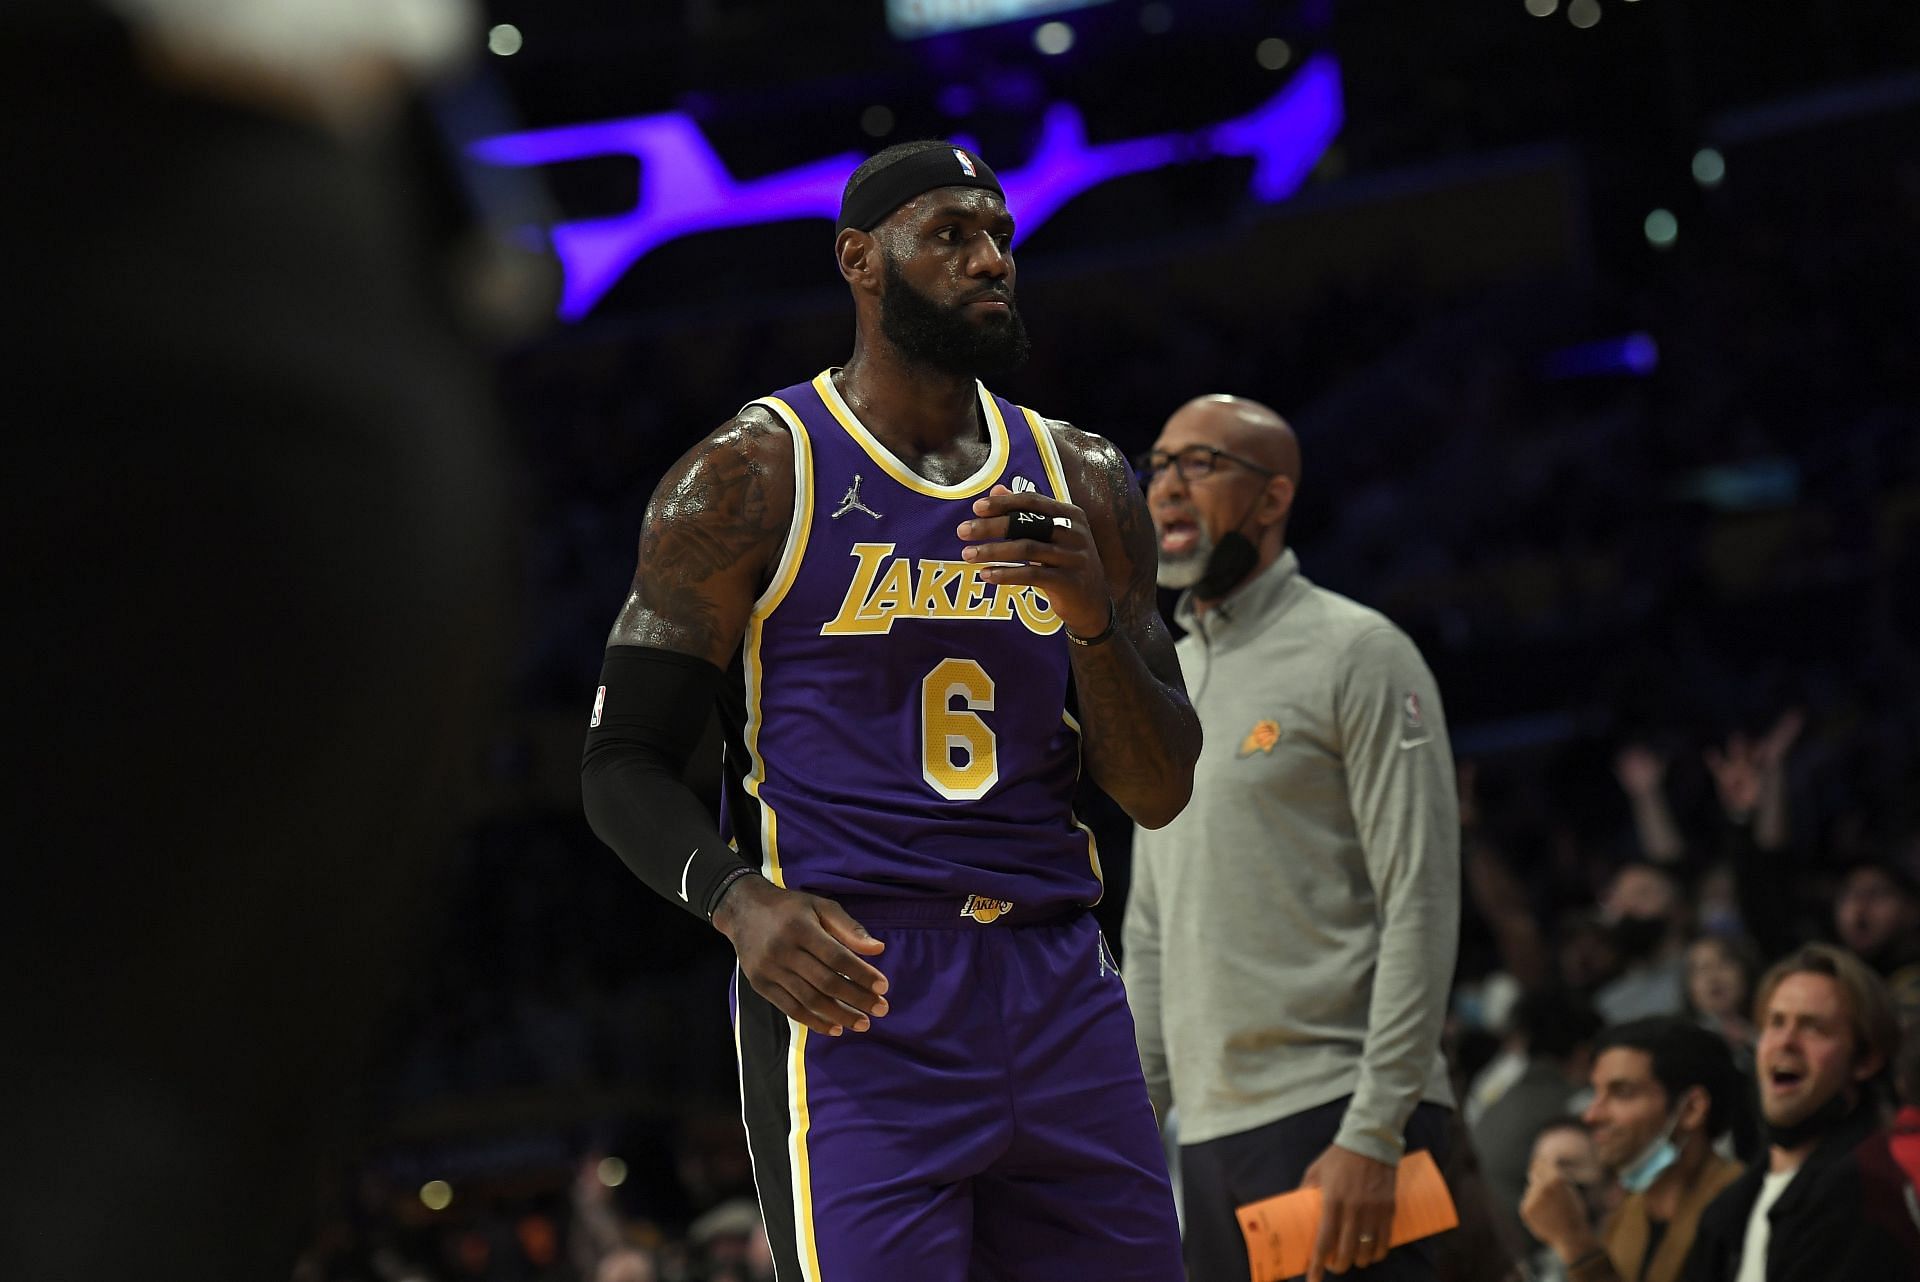 LeBron James looks at the Phoenix Suns bench after scoring at Staples Center on October 22, 2021